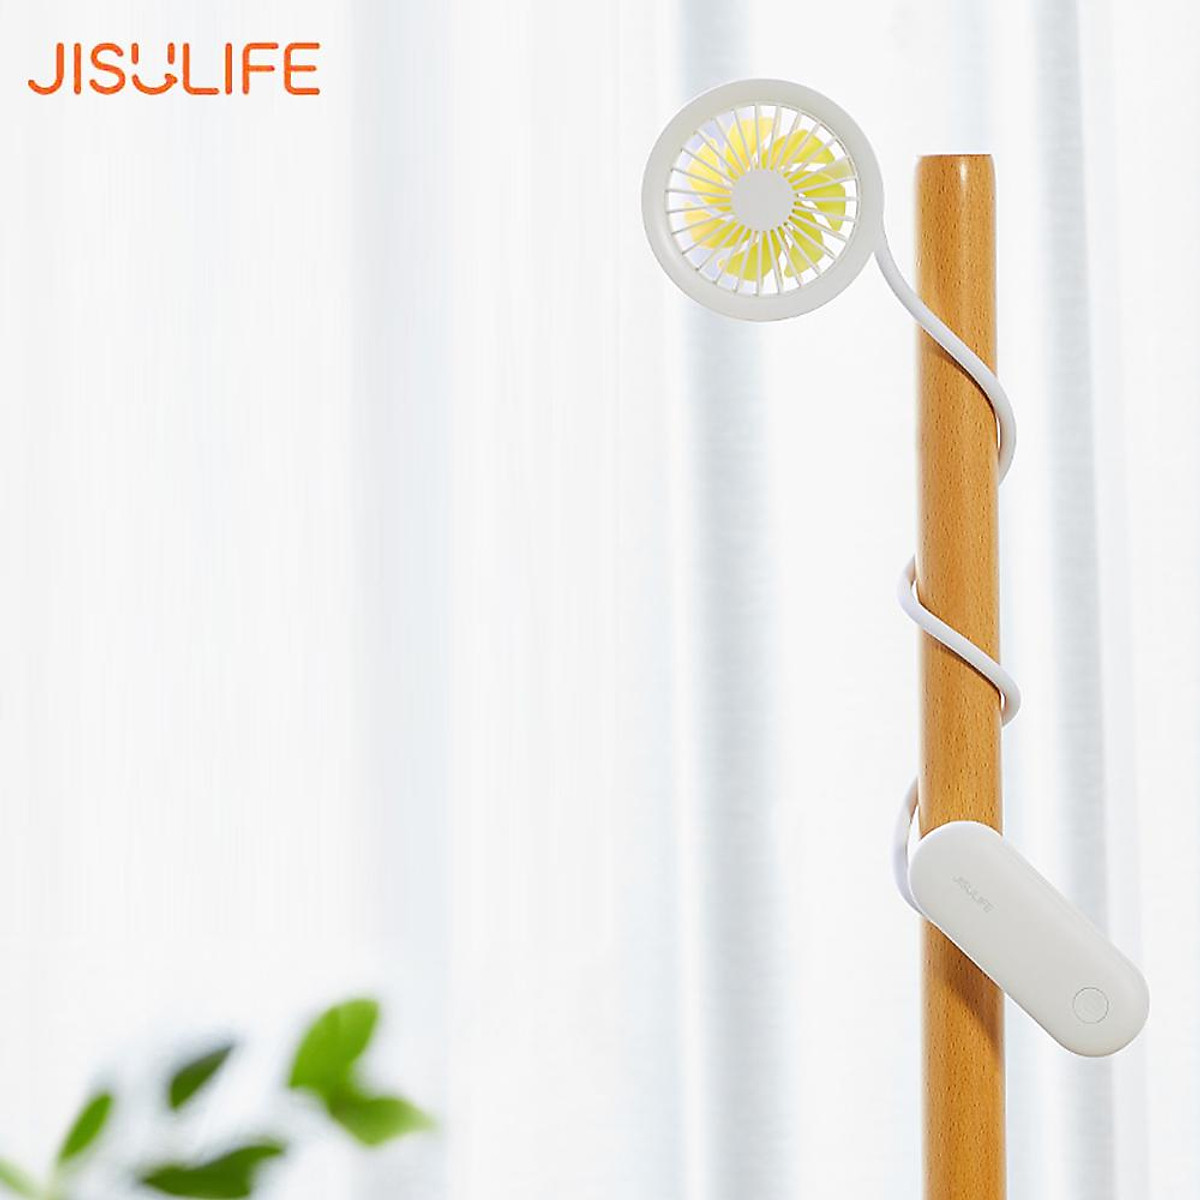 JISULIFE Portable Neck Fan Mini Foldable Air Cooler with 7 Blades/3 Speeds Adjustable/Low Noise/Type-C Interface/2000mAh